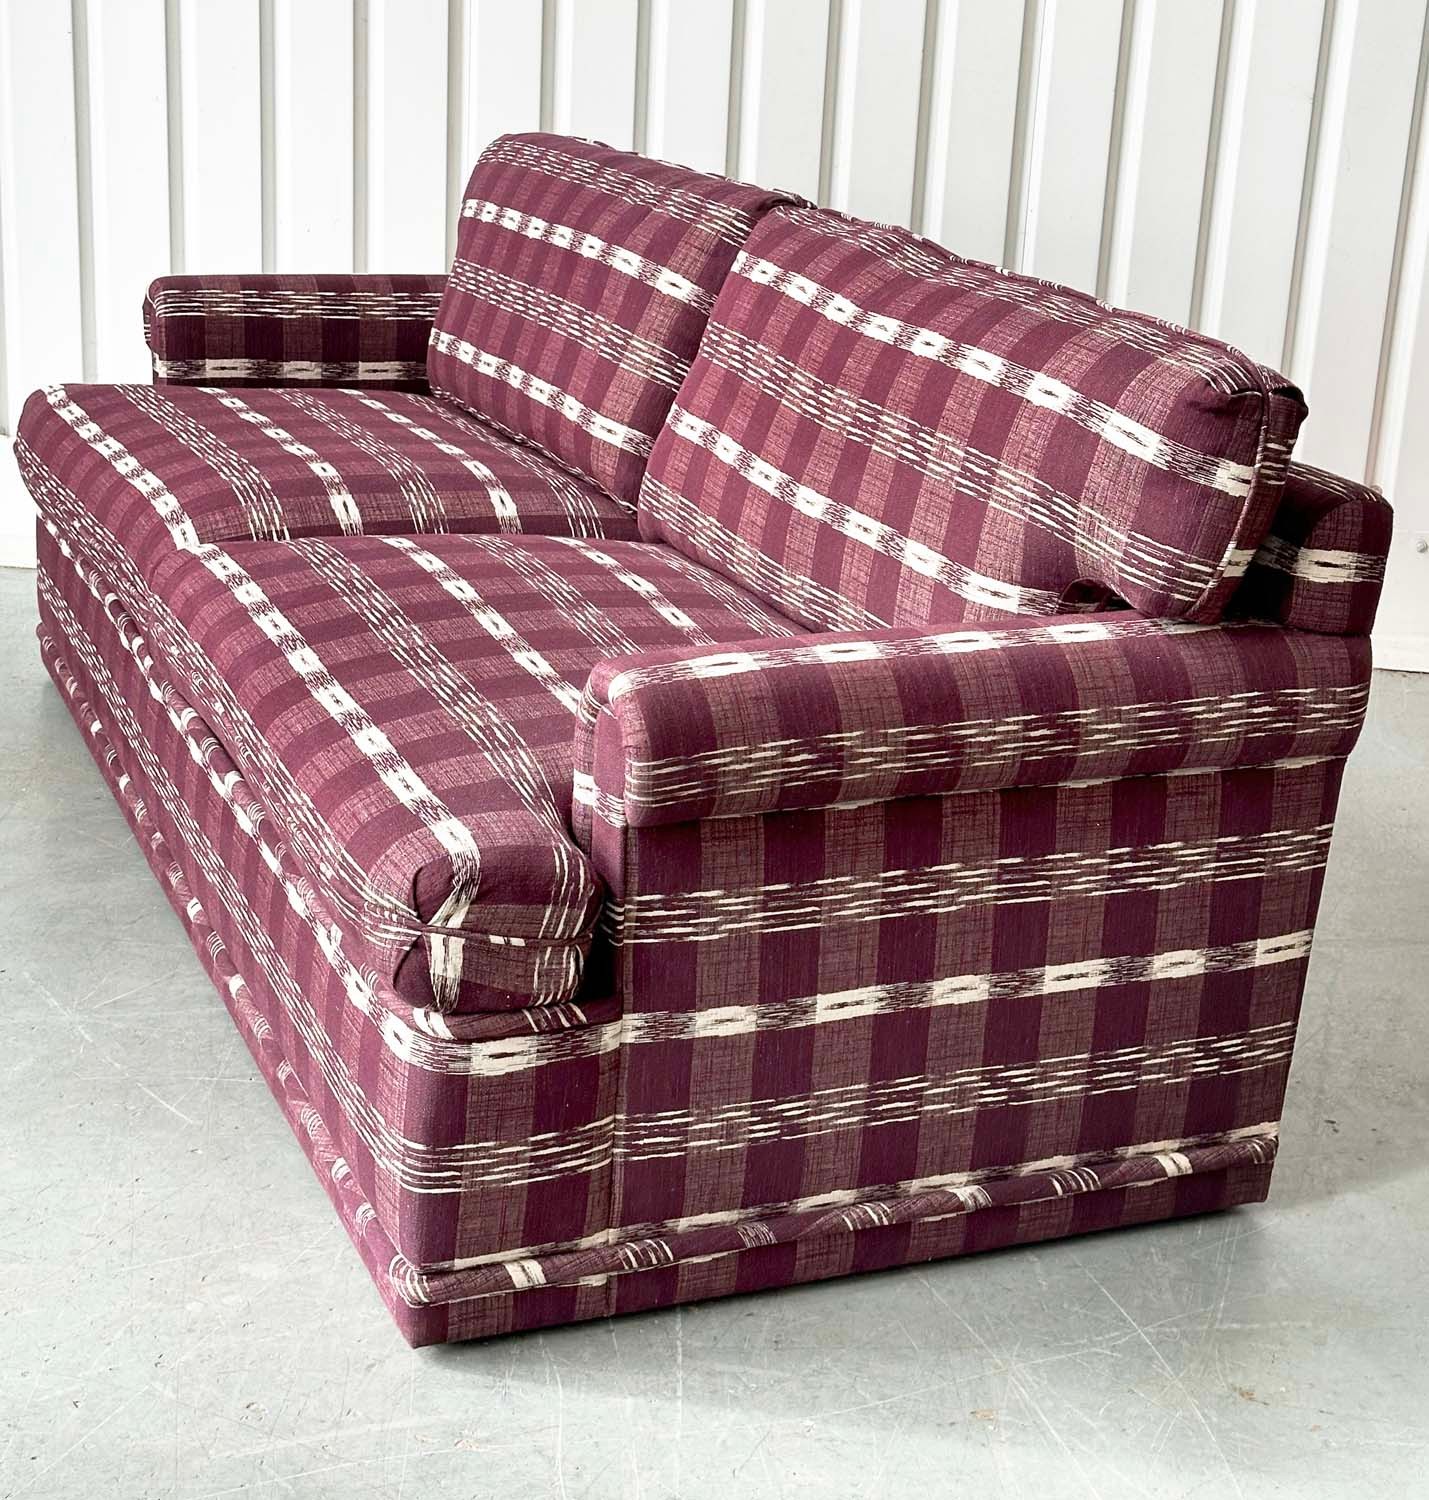 SOFA, Swedish check purple/white upholstery with scroll arms, 203cm W. - Image 15 of 18